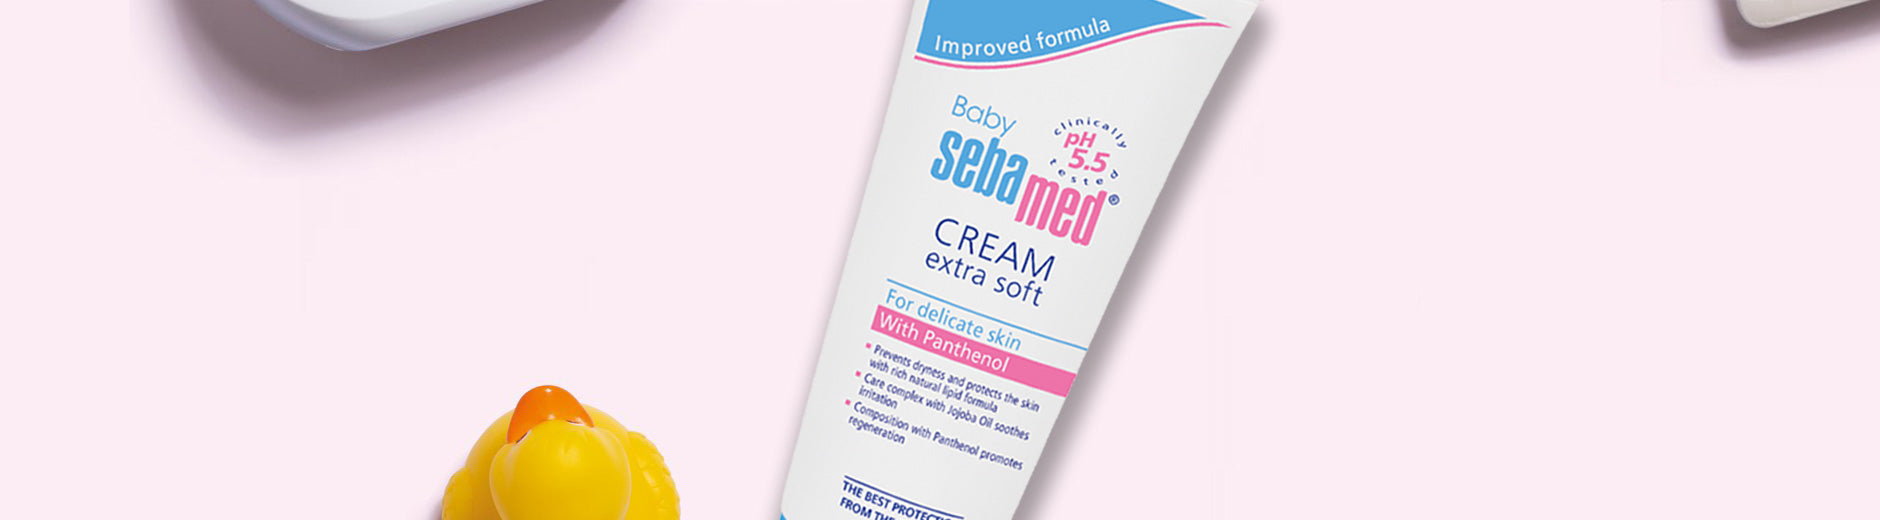 tube of baby cream for delicate babies skin